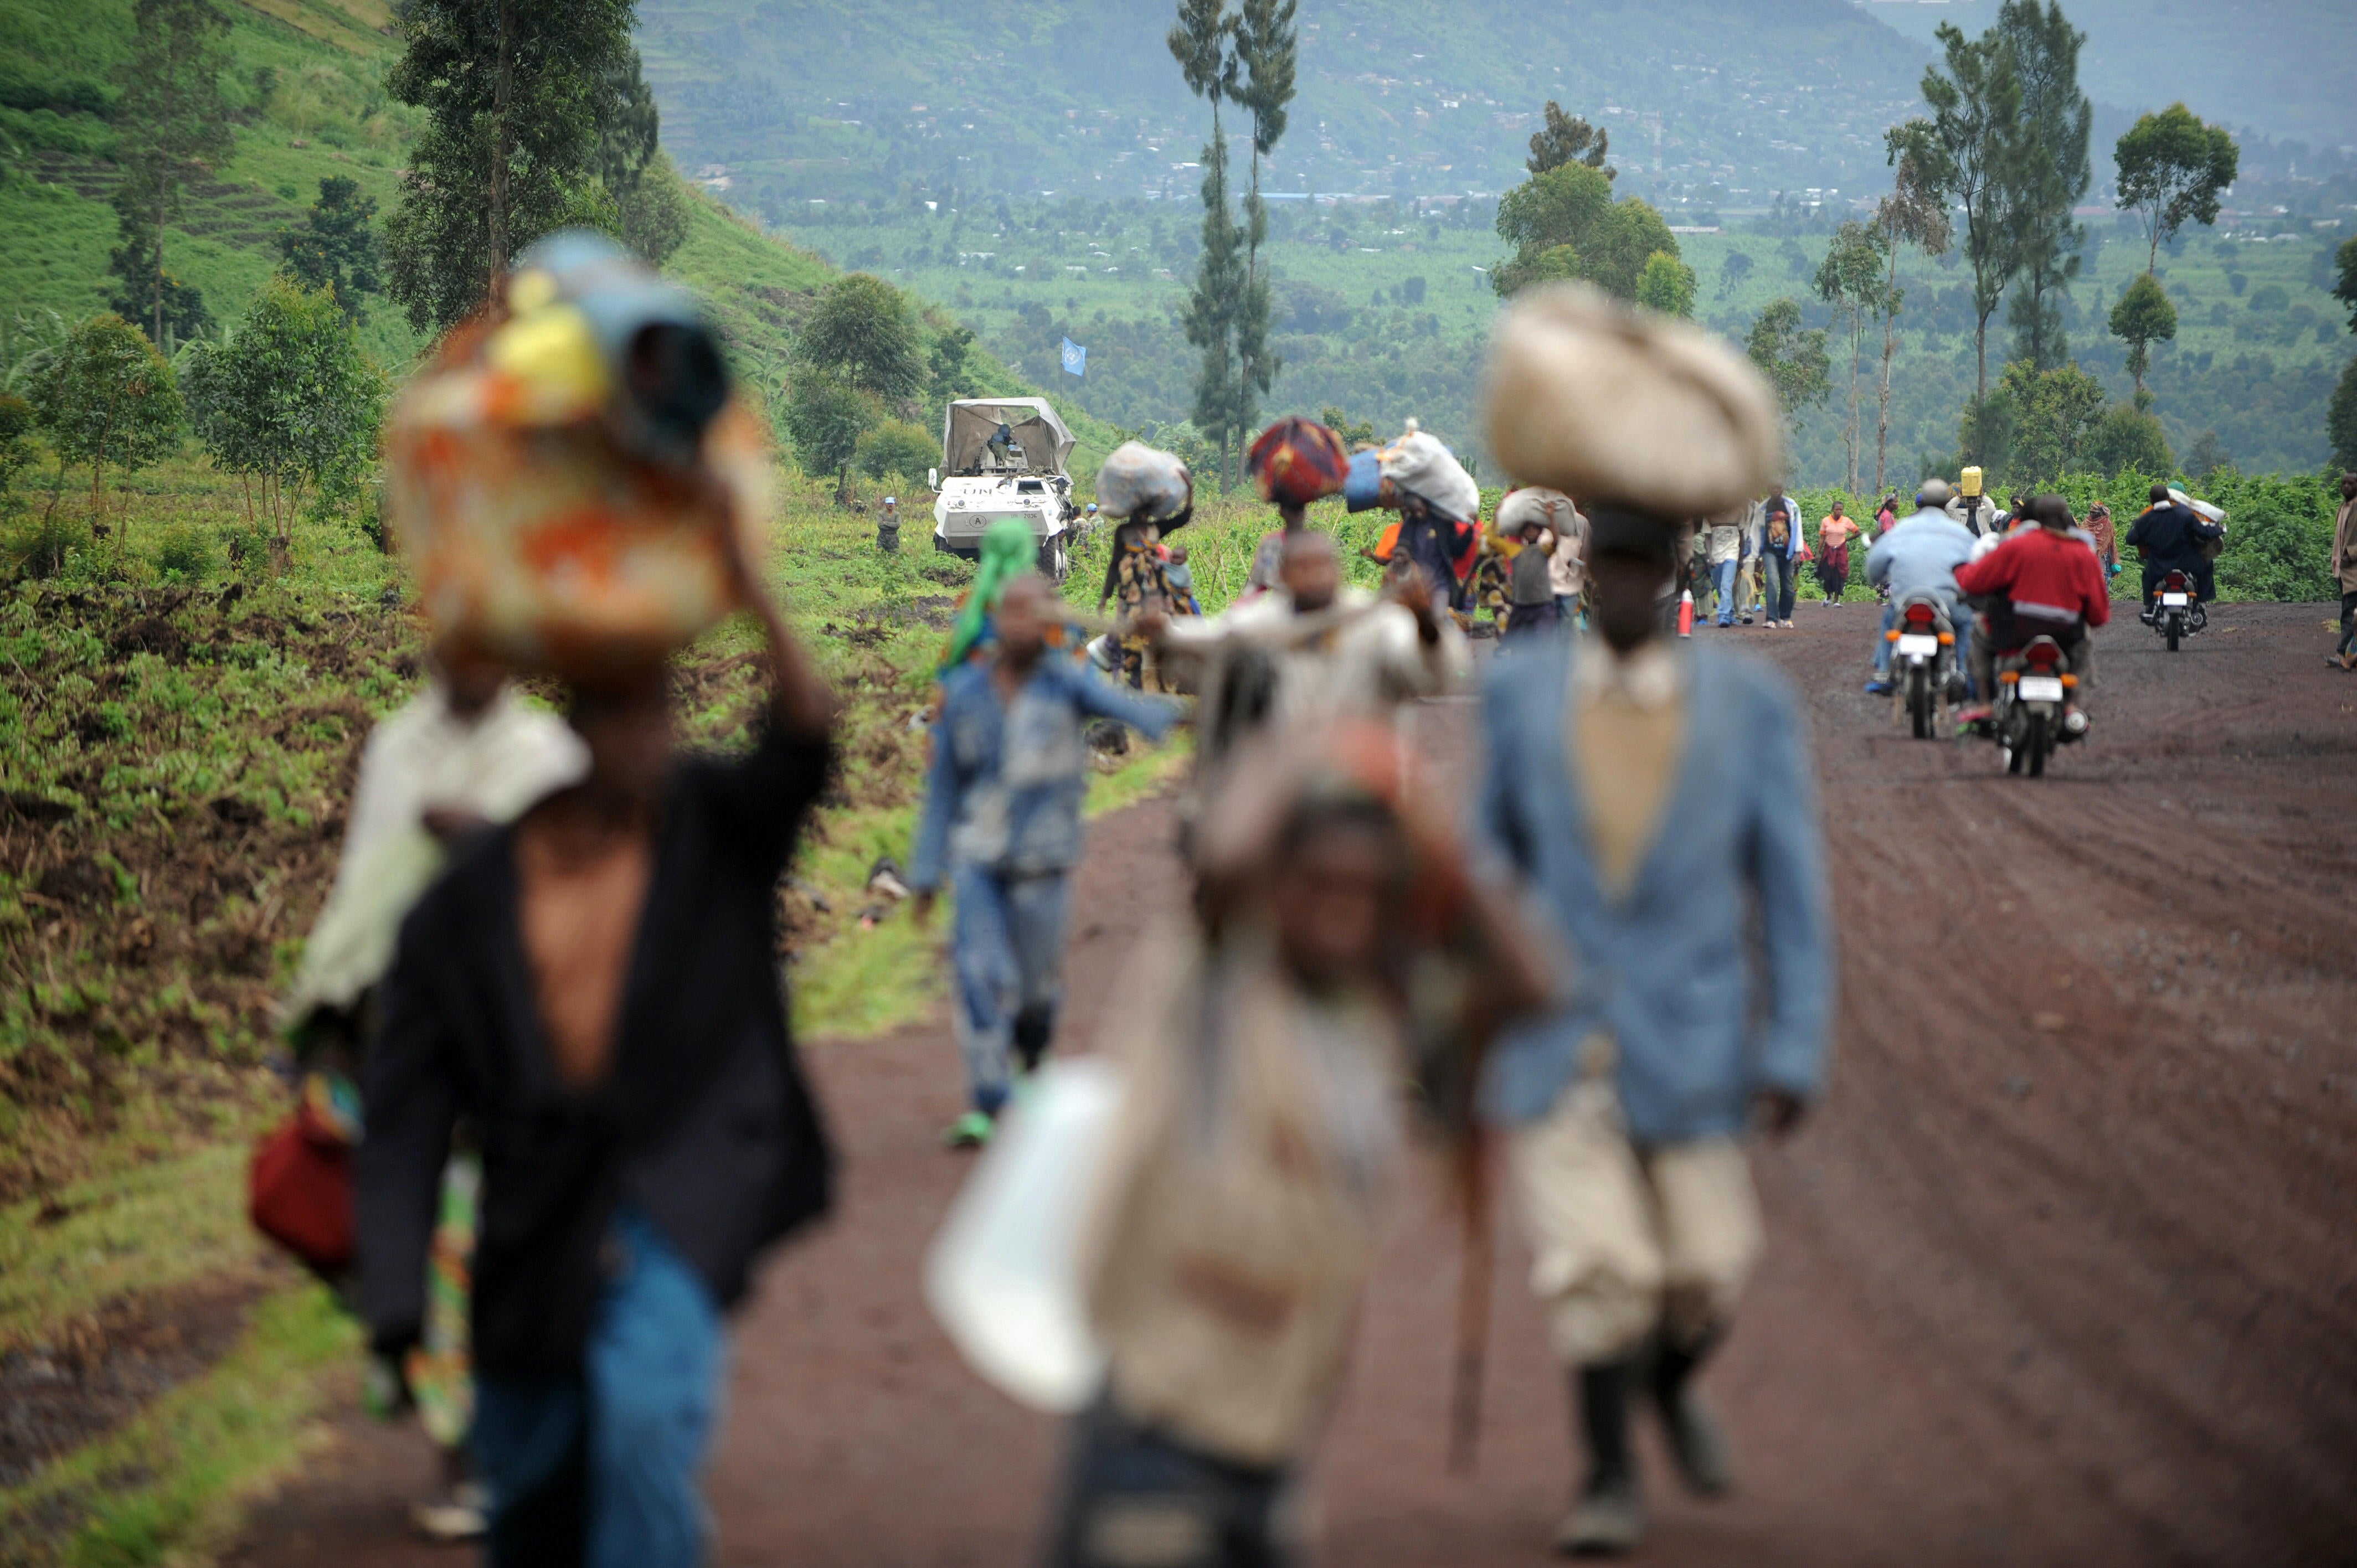 File: Human Rights Watch and Oxfam were among the groups that worked in Goma, Democratic Republic of the Congo after people were displaced by violence in 2008